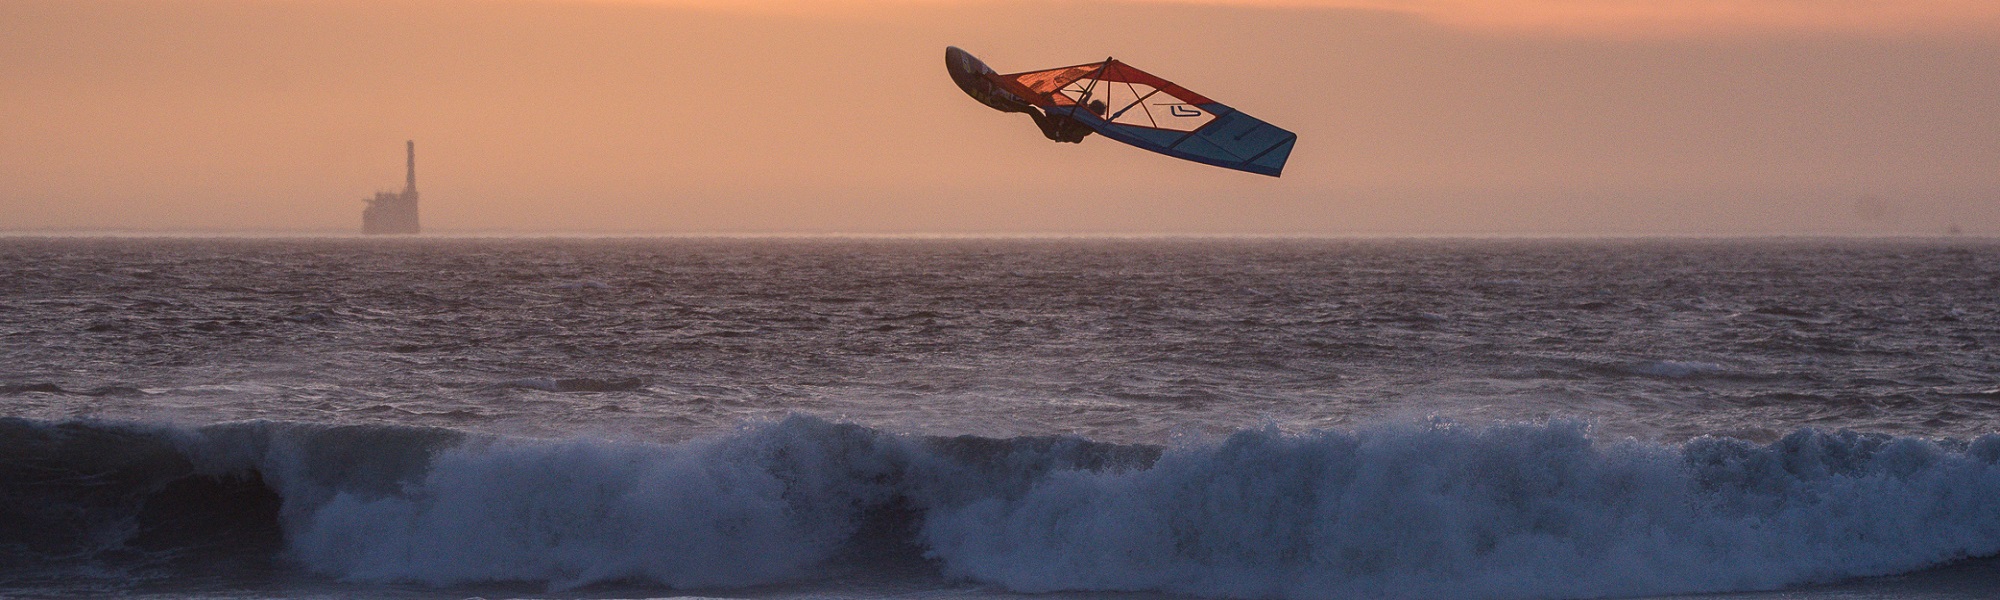 24 Hours in Cape Town: A day in the life of a professional windsurfer